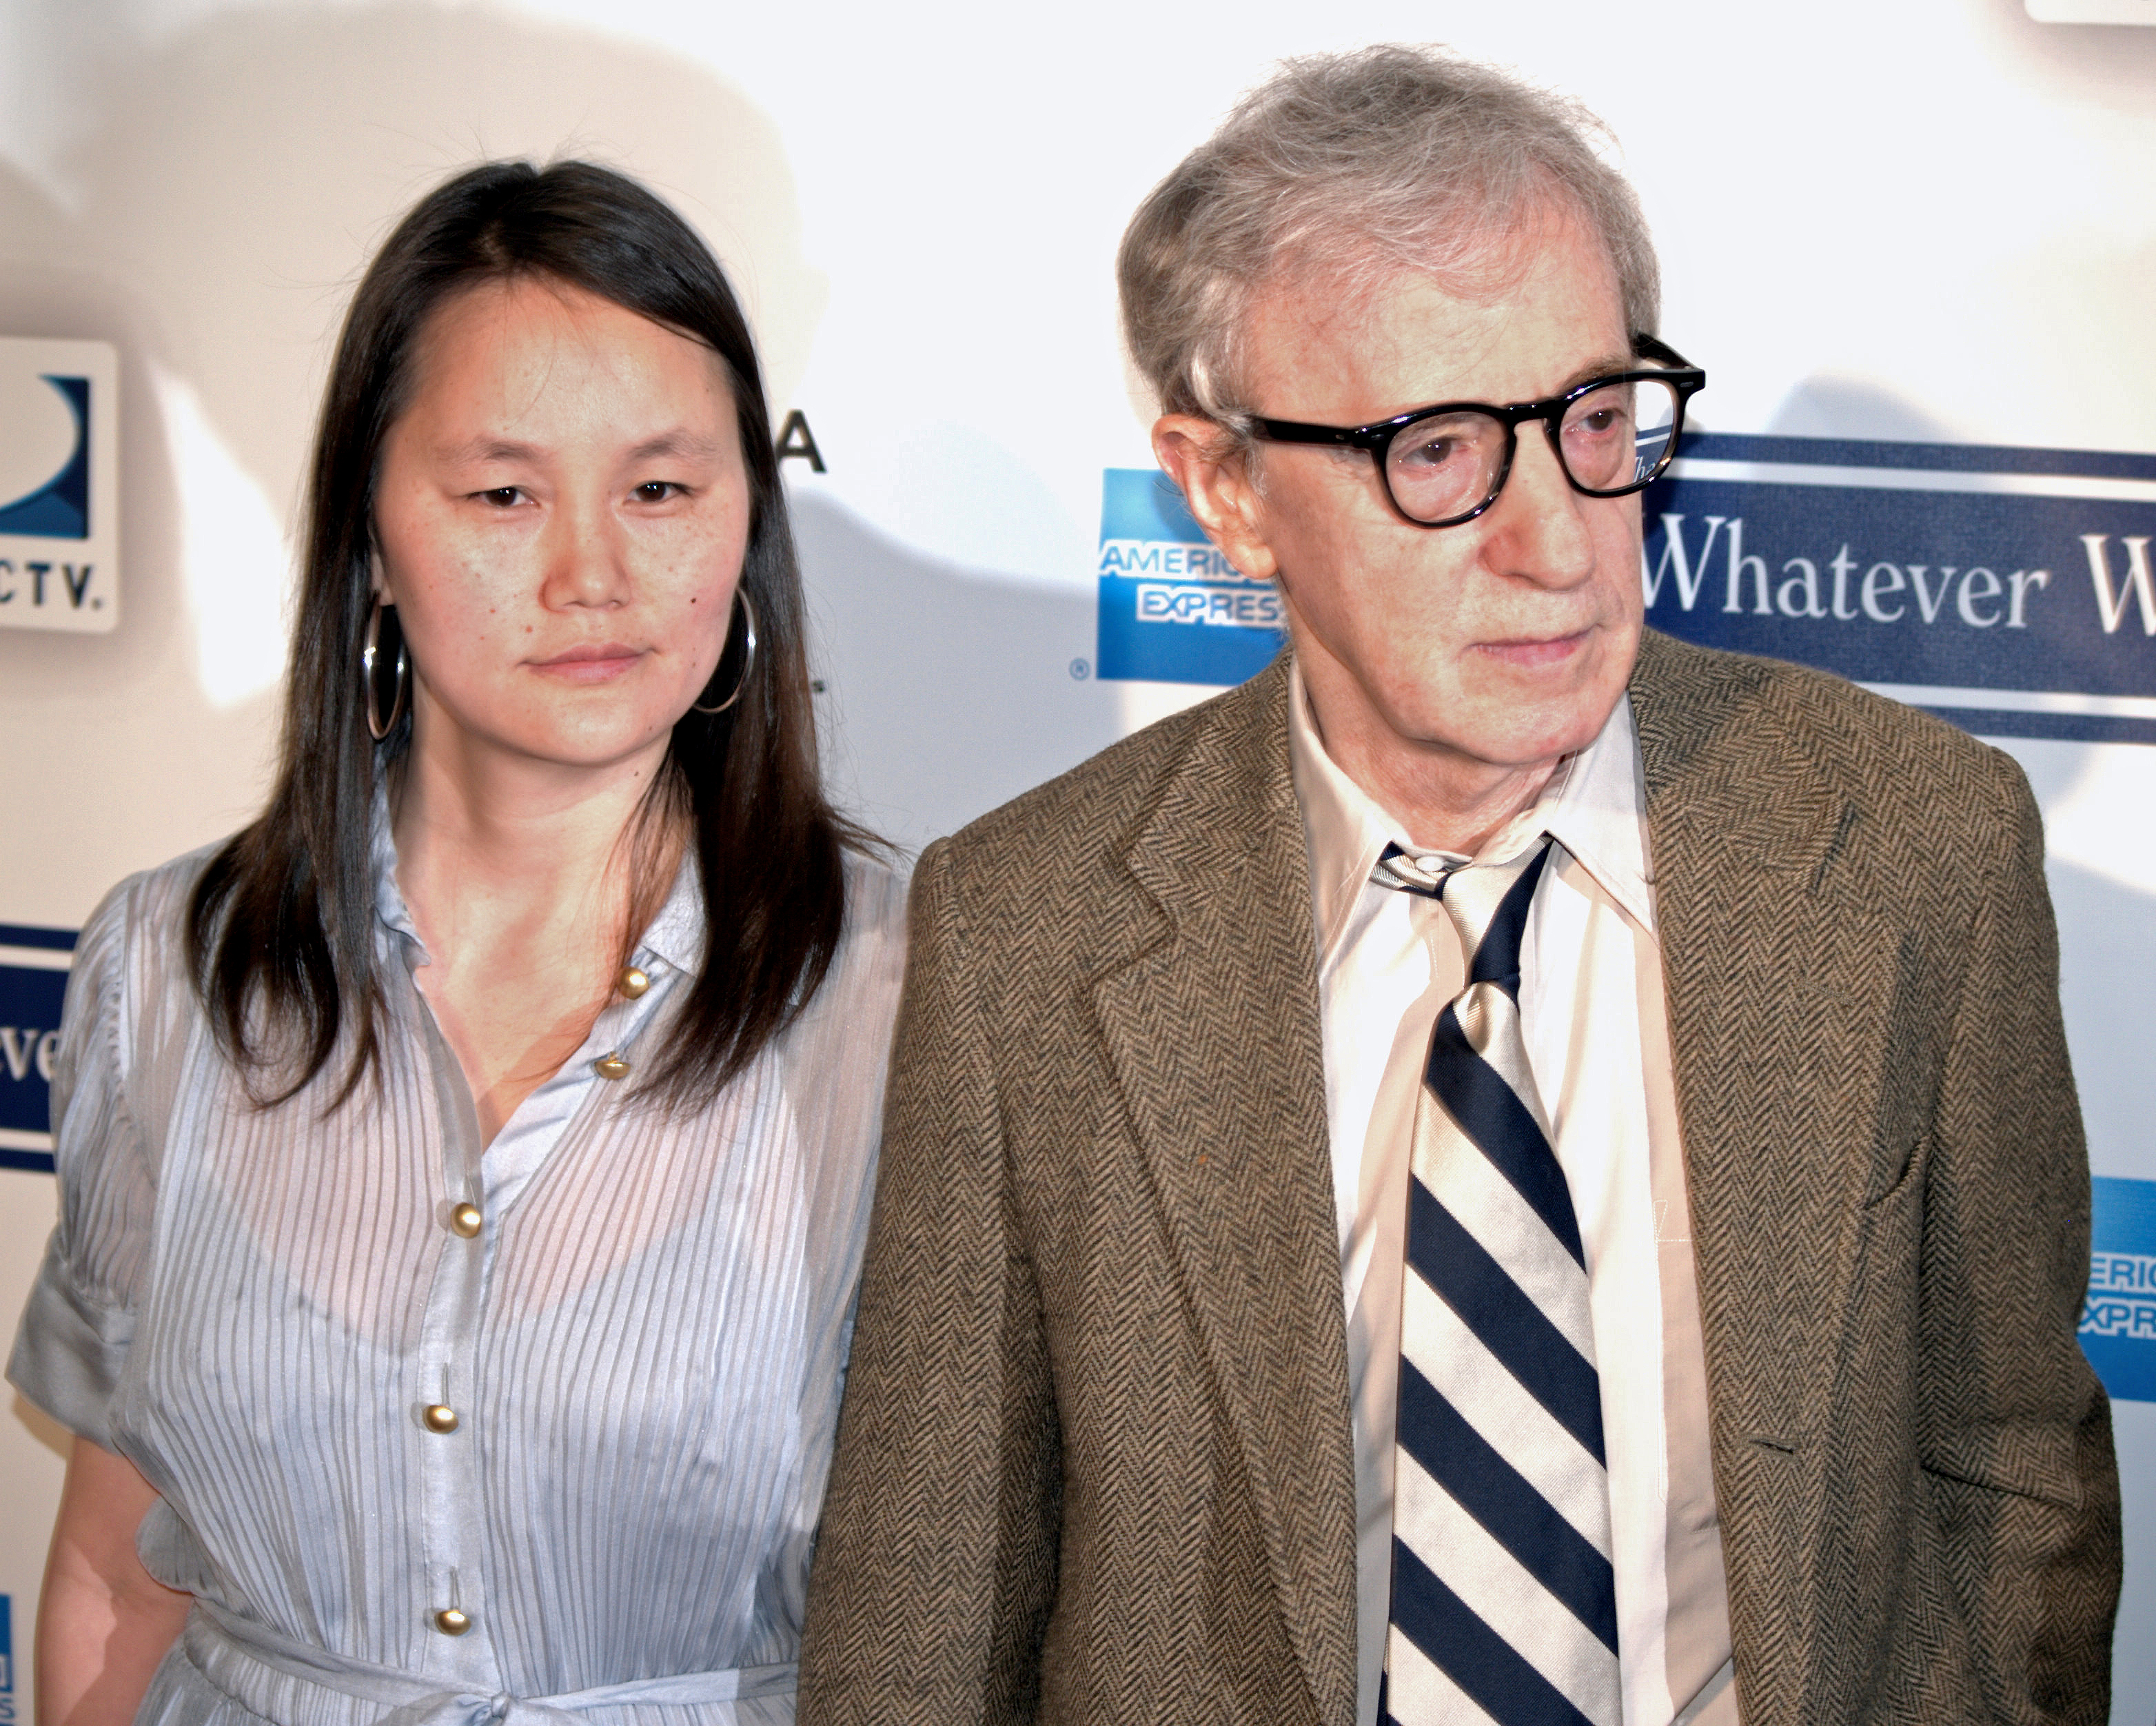 Soon_Yi_Previn_and_Woody_Allen_at_the_Tribeca_Film_Festival.jpg